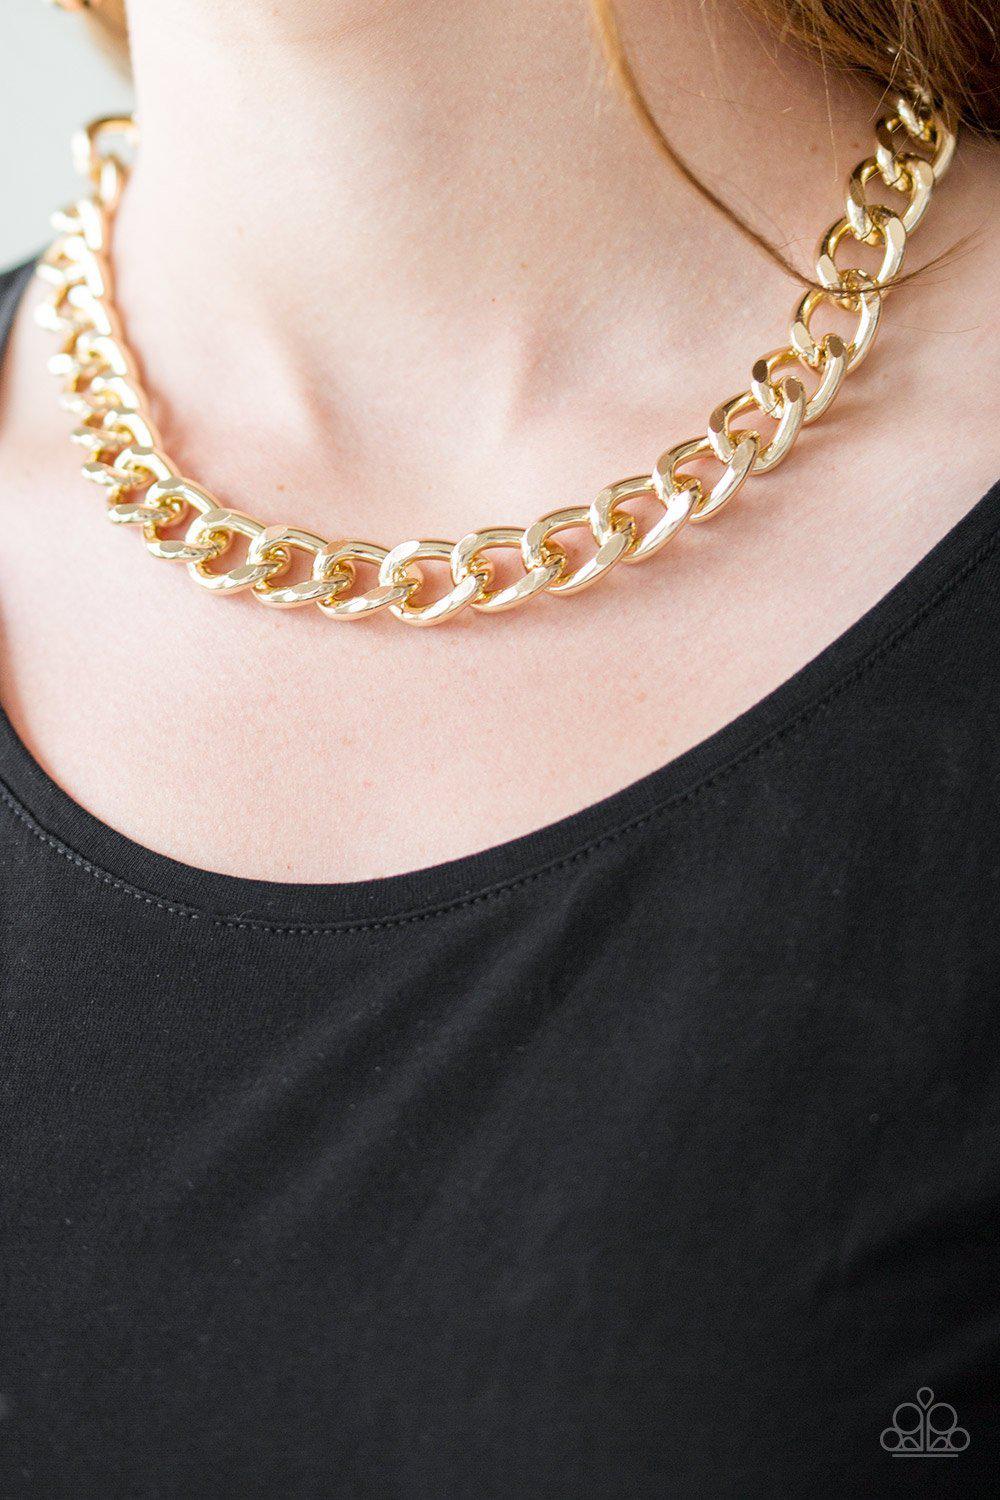 Heavyweight Champion Gold Chain Necklace - Paparazzi Accessories-CarasShop.com - $5 Jewelry by Cara Jewels